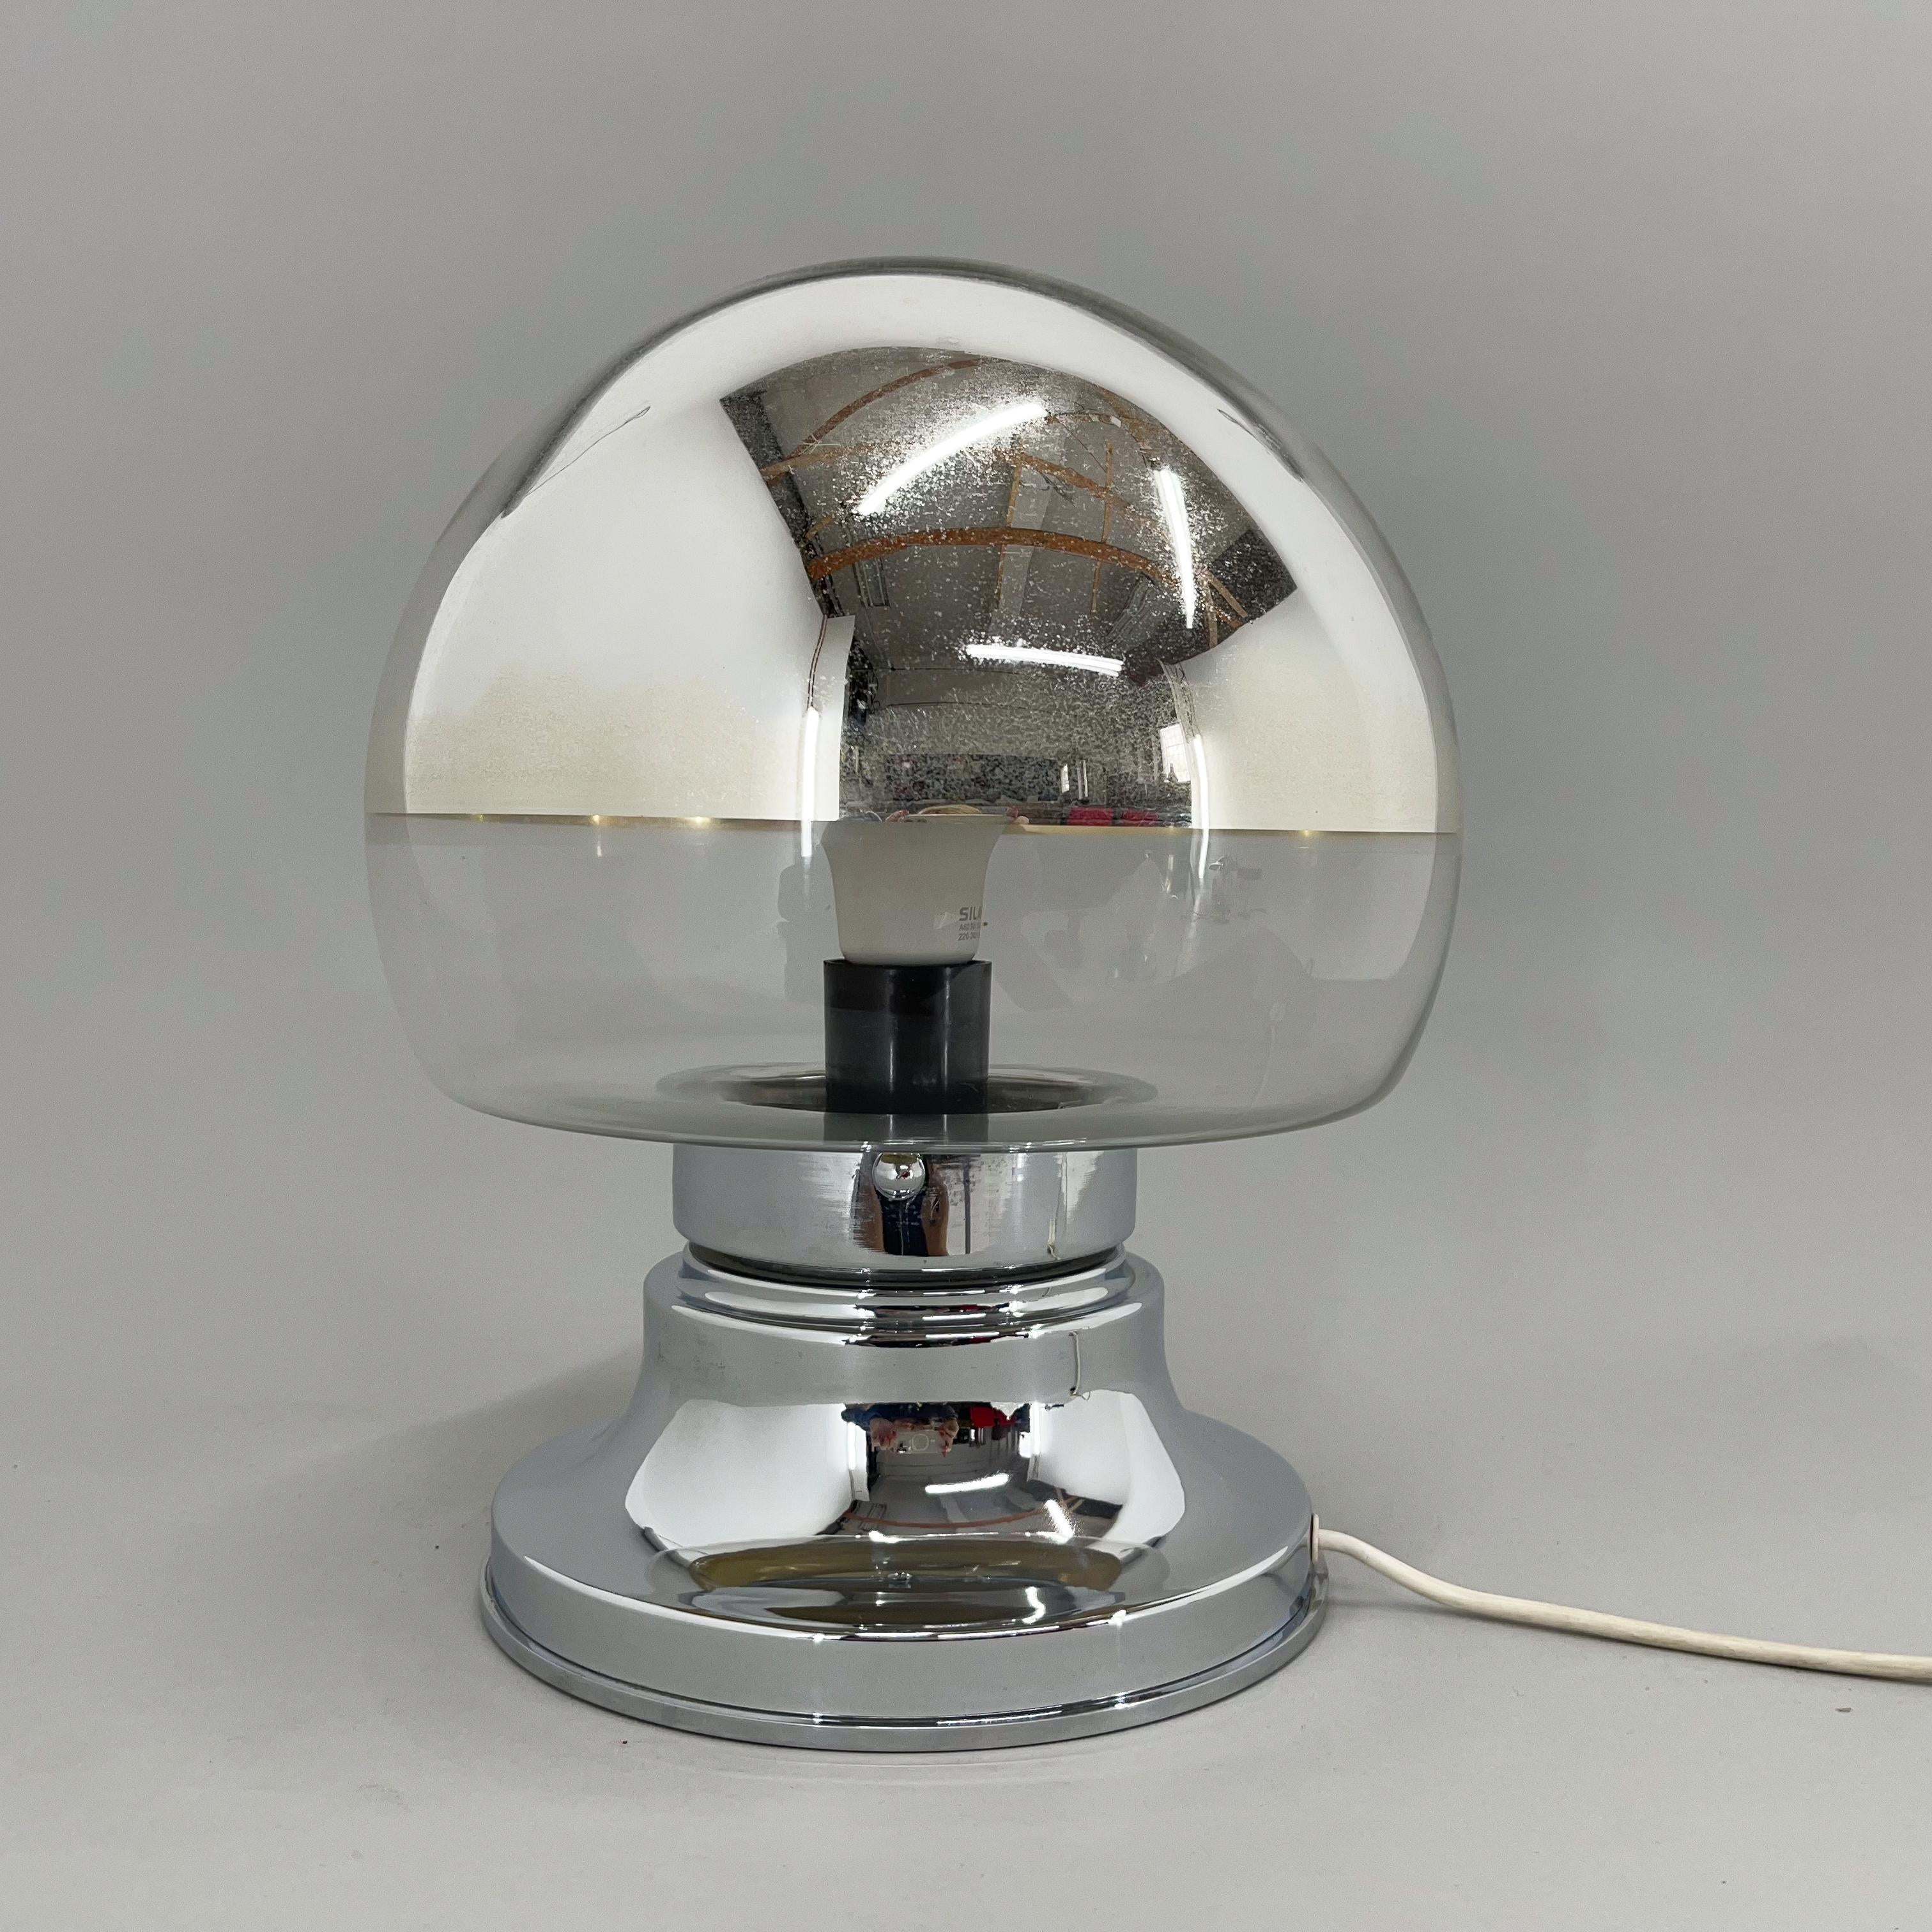 Beautiful modernist table lamp in the round in glass and chrome. In very good original condition with some interior rubbing to the chrome. Bulb: 1 x E27 or E26.